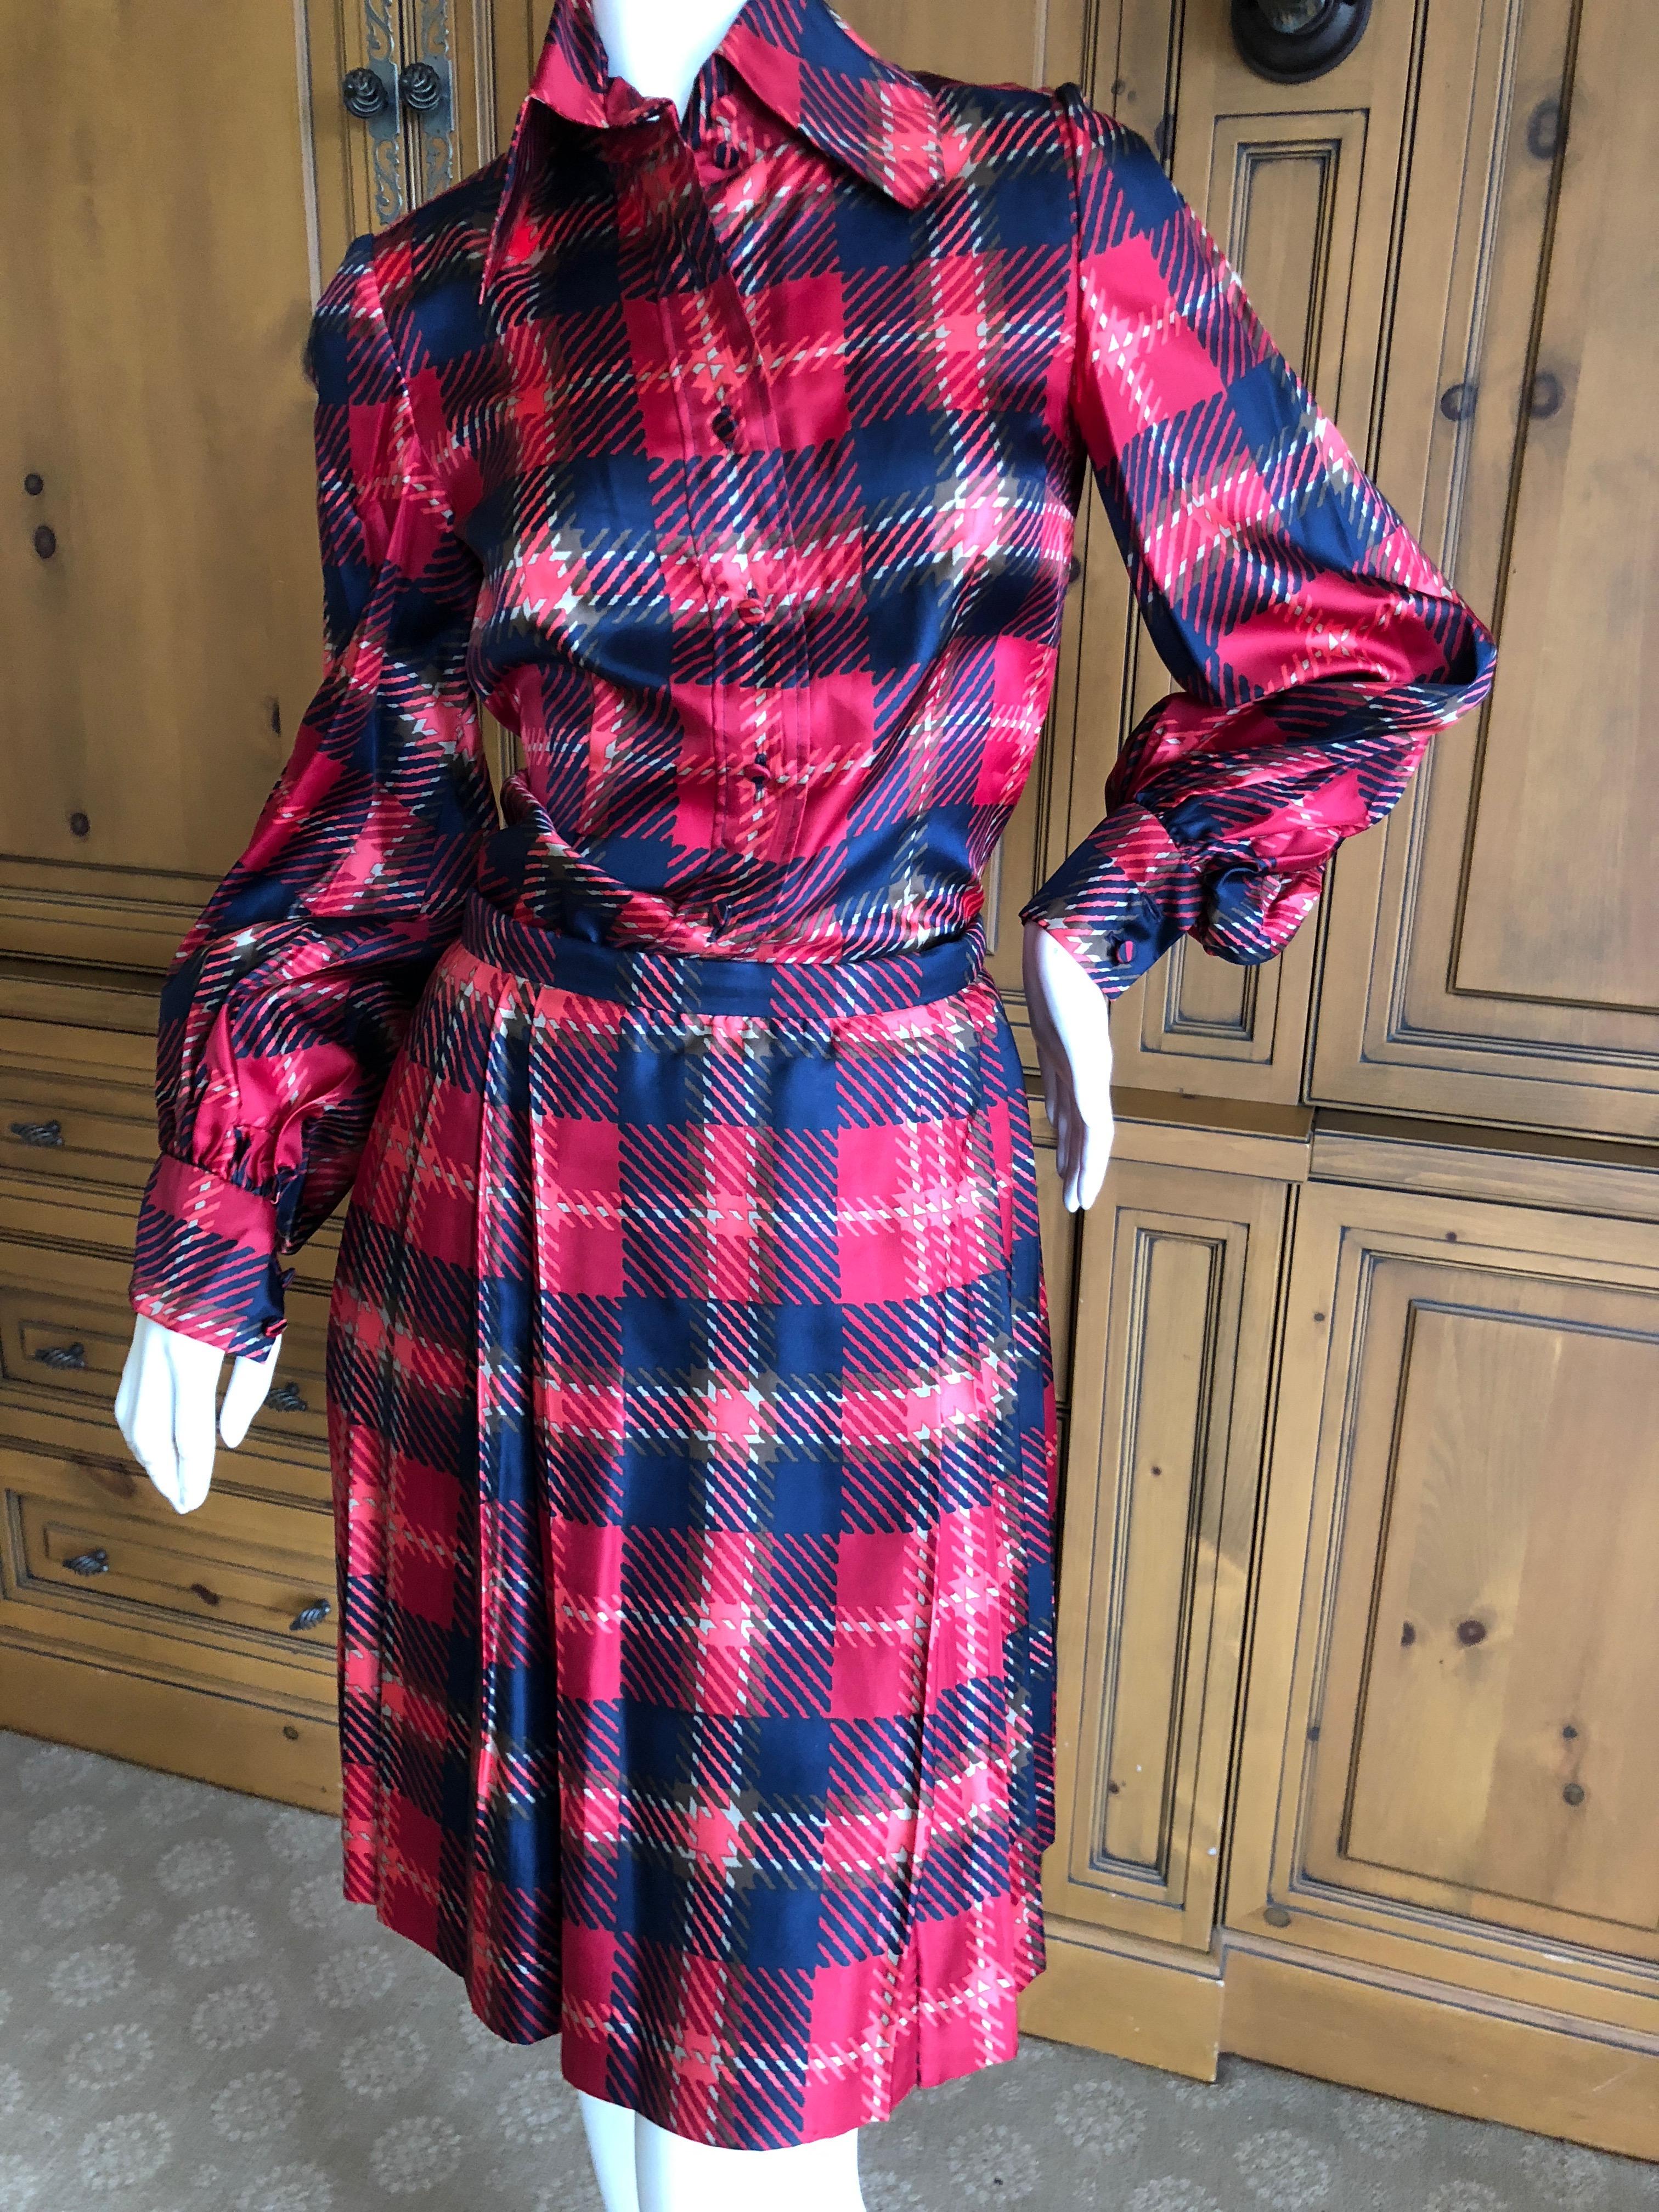 Cardinali Plaid Silk Three Piece Skirt Suit with Jacket Fall 1972
From the Archive of Marilyn Lewis, the creator of Cardinali
Cardinali was founded in Los Angeles in 1970, by Marilyn Lewis, who had already found success as the founder and owner of